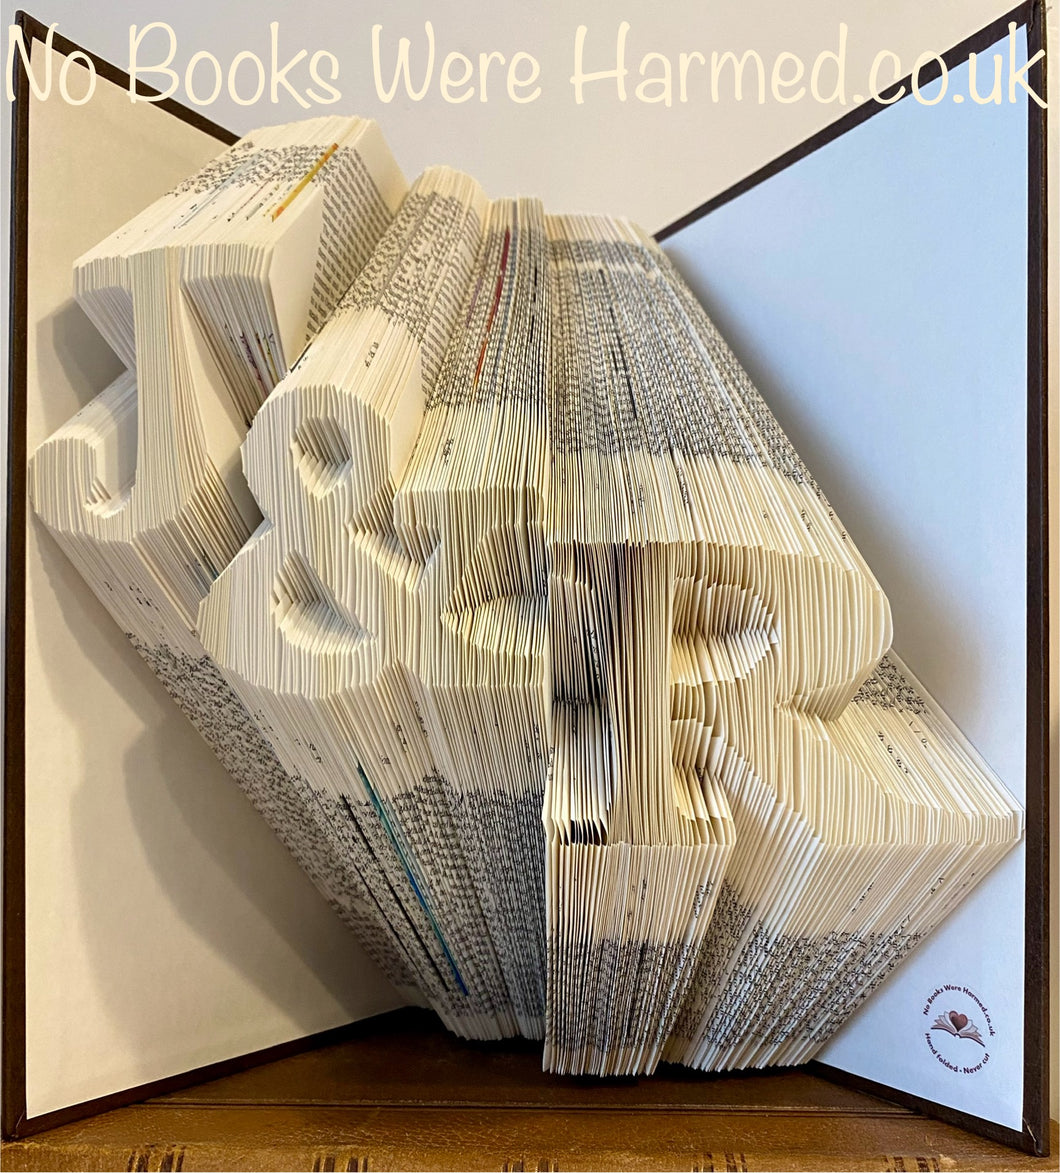 PICK YOUR OWN Your choice of large initials, hand folded into the delicate pages of a beautiful encyclopaedia. Perfect wedding gift or decoration,